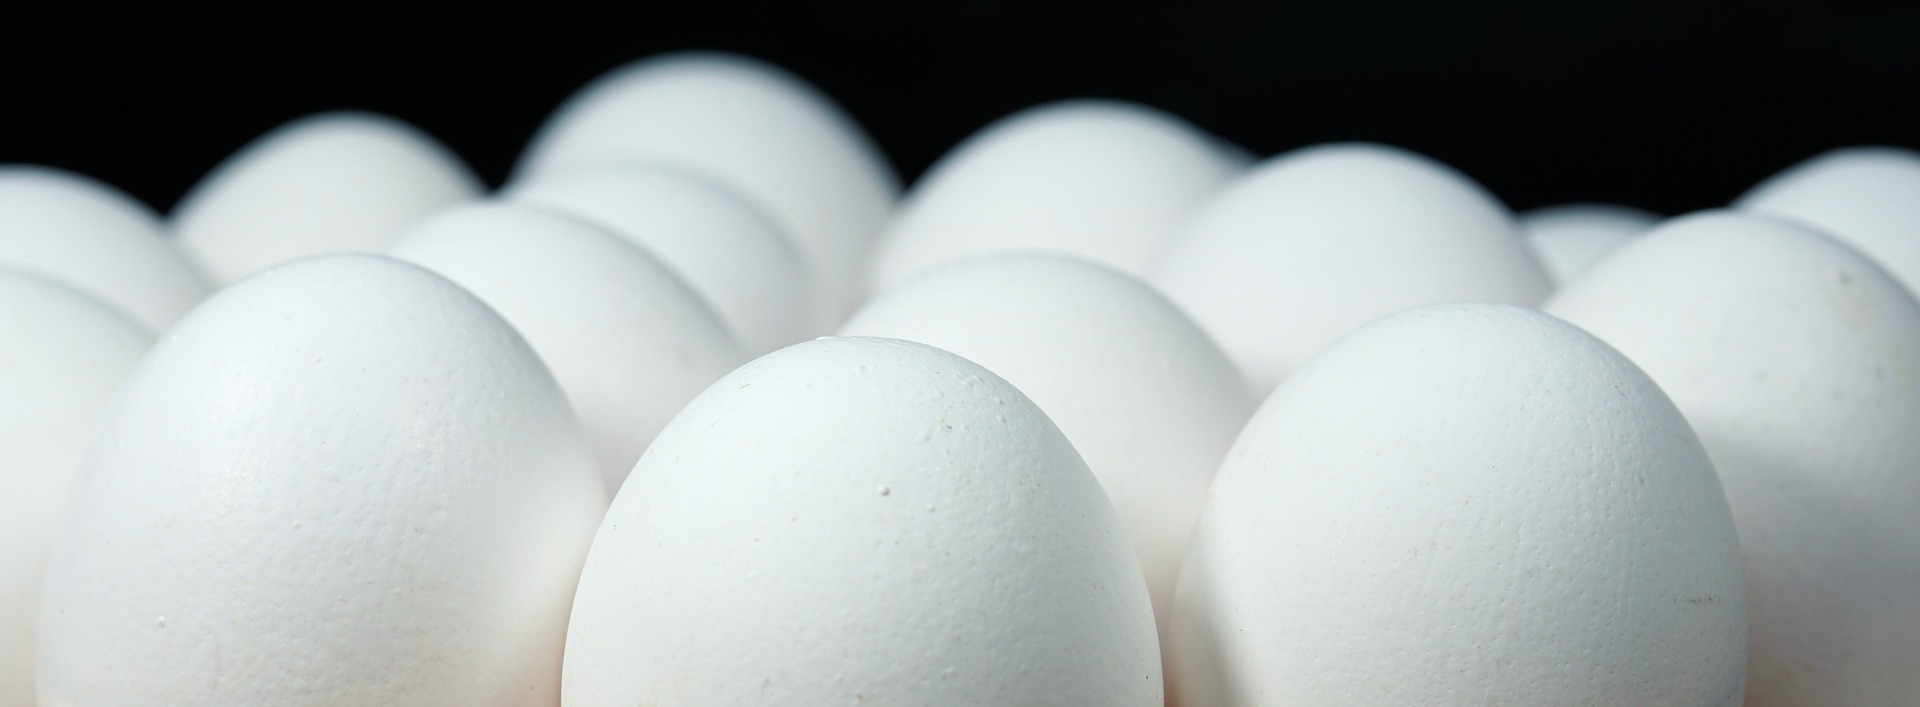 Commitments to a cage-free future pinch egg producers in the present